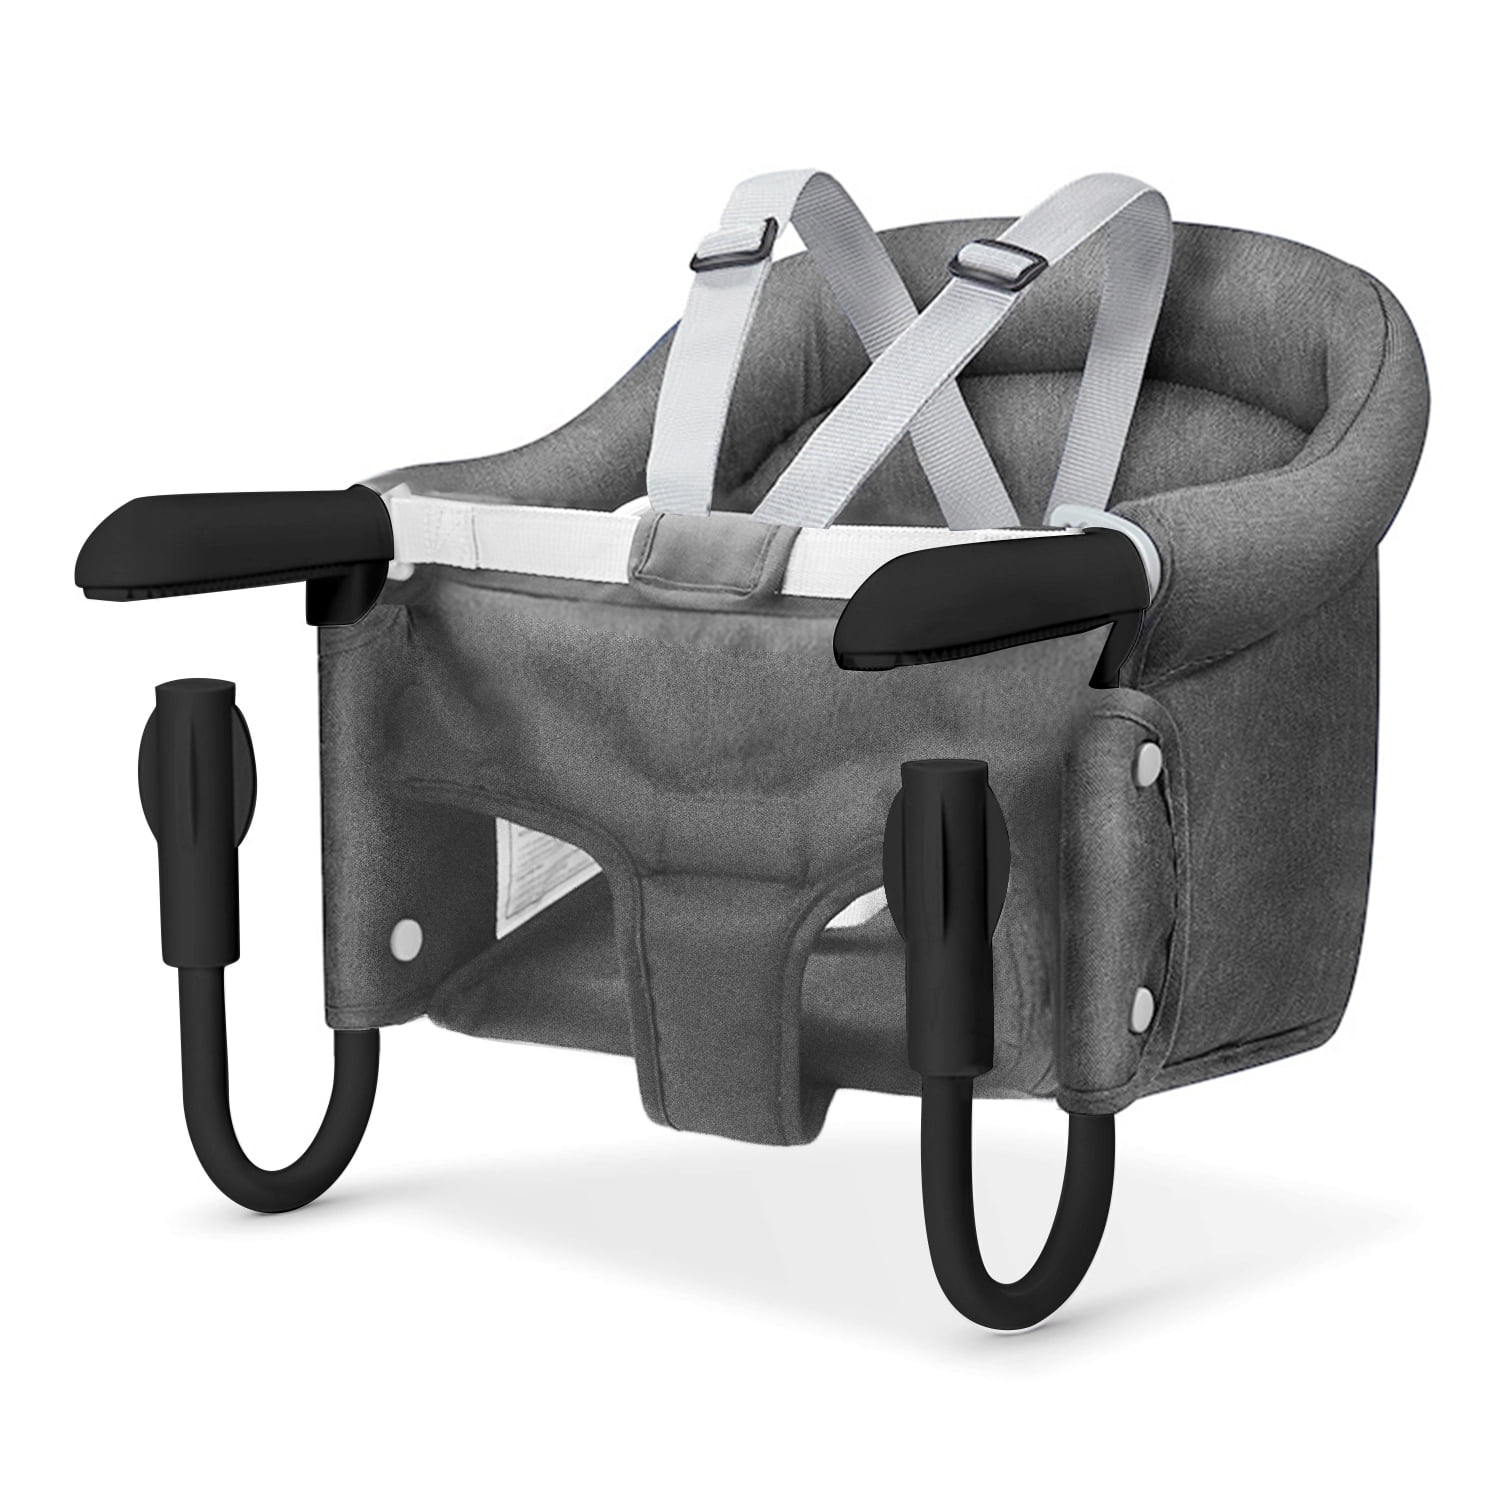 Hook On High Chair Portable Baby Clip, Chicco Caddy Hook On High Chair Tray